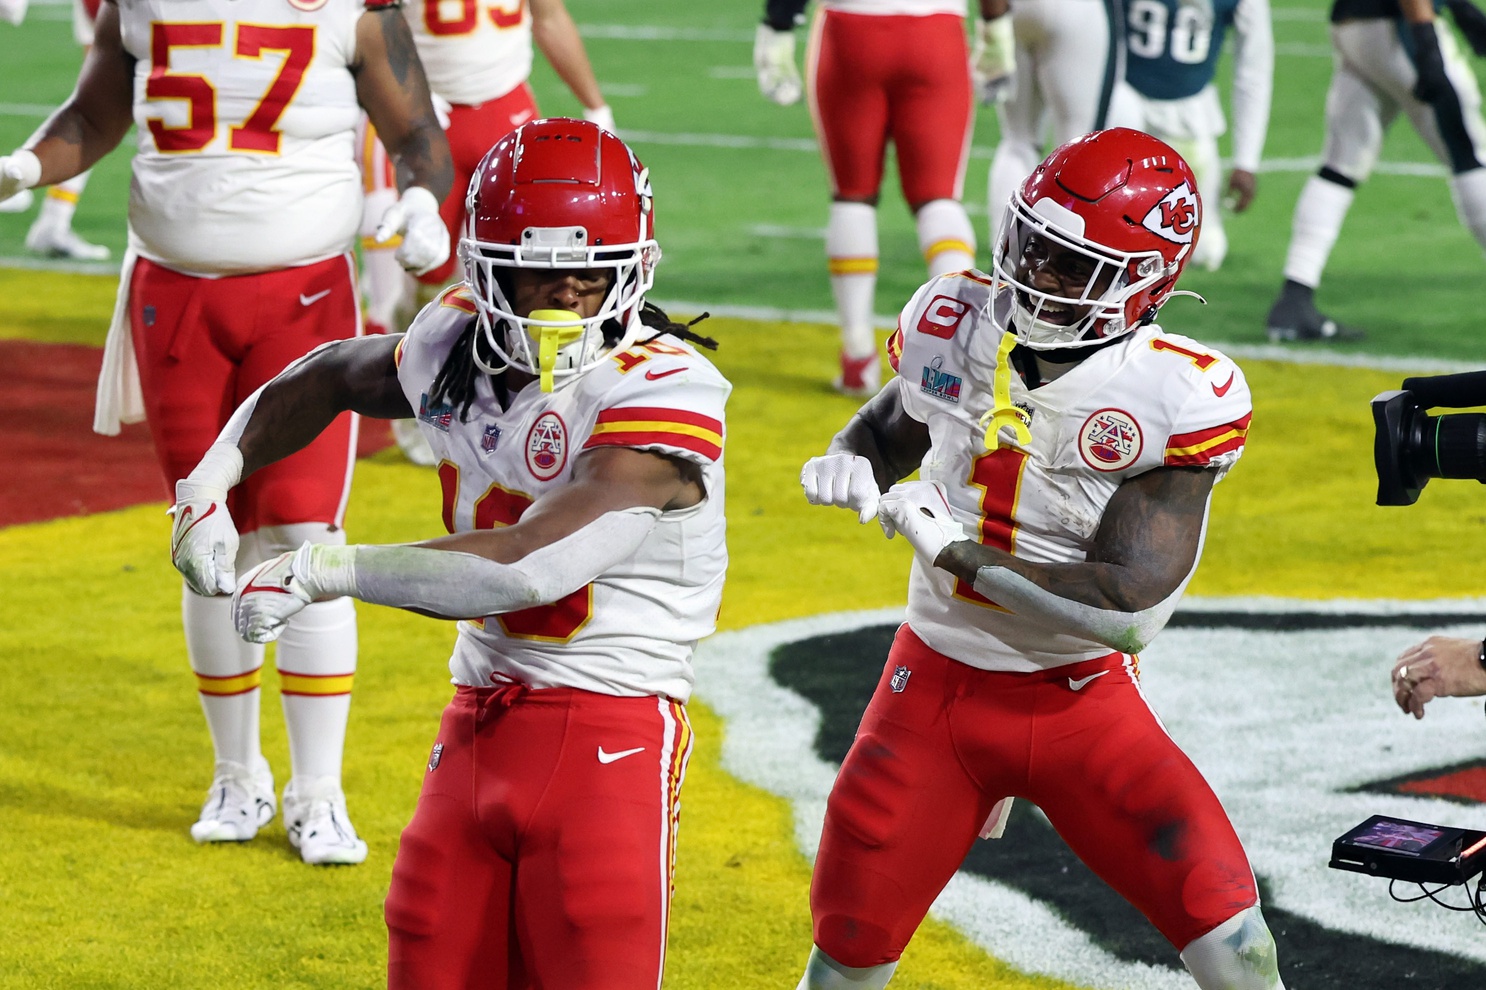 Chiefs Re-Sign RB Jerick McKinnon: What To Make of This Backfield?